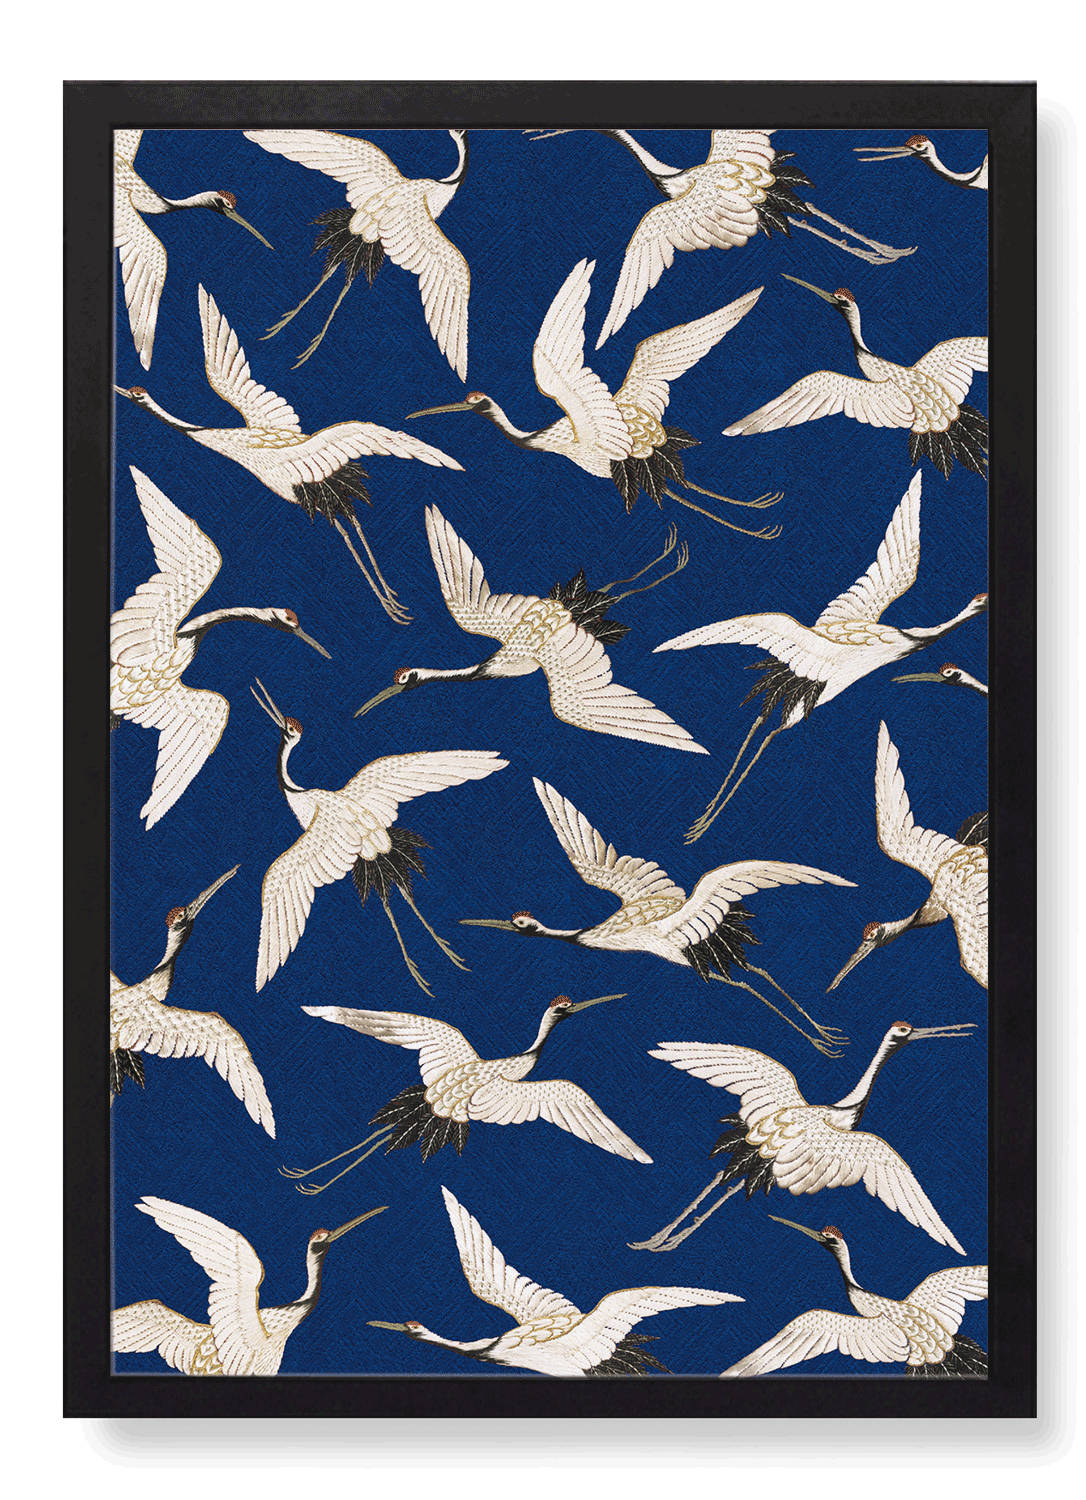 CRANE EMBROIDERY ON BLUE